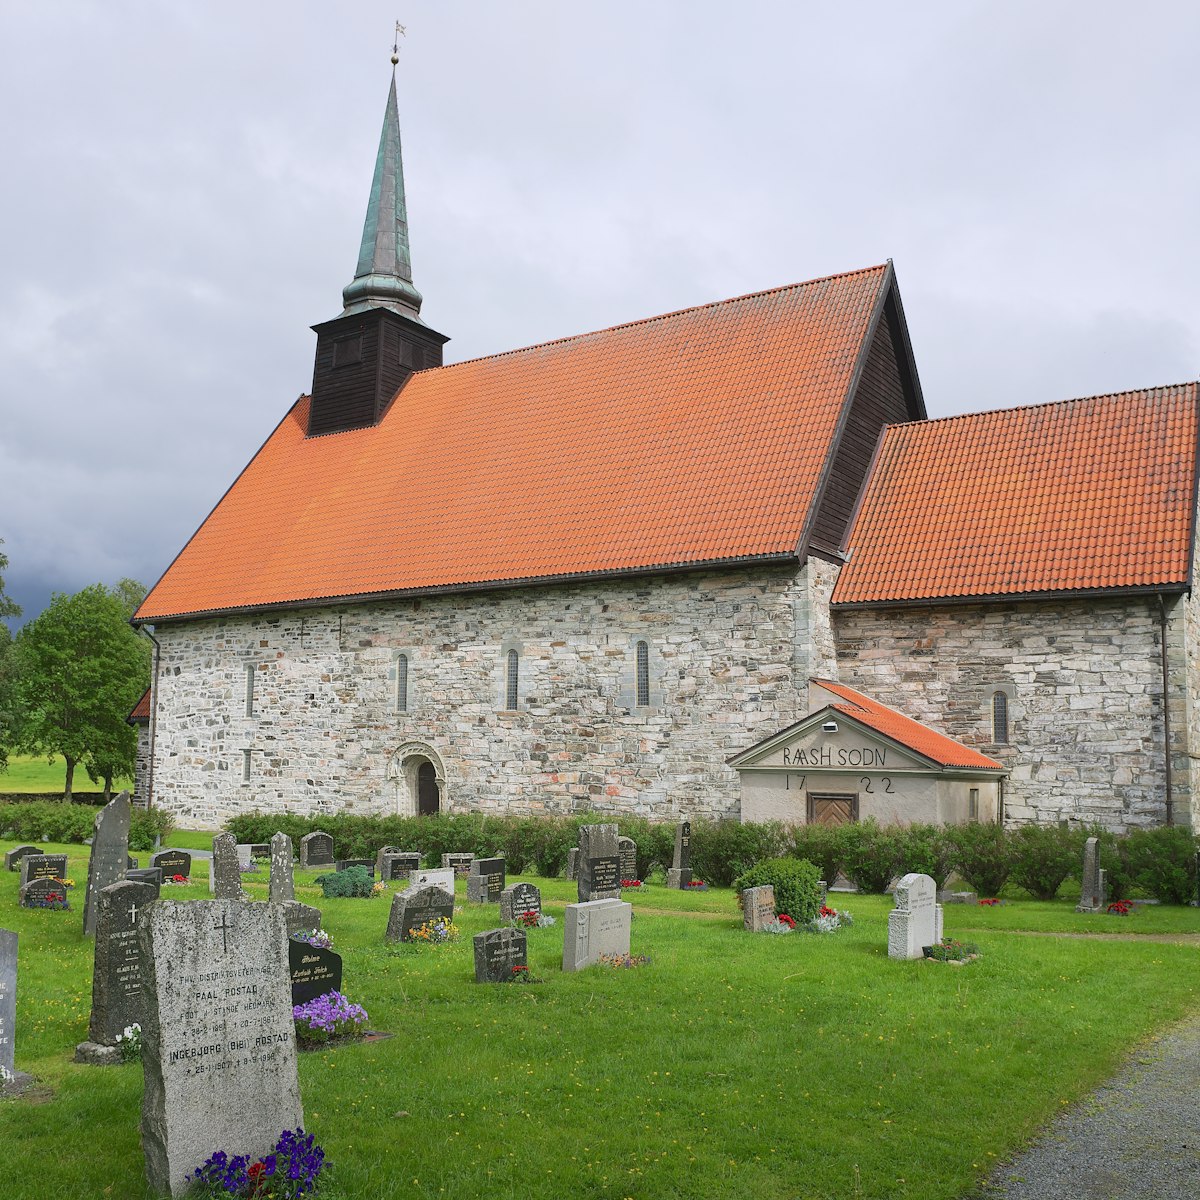 Stiklestad church and cemetery in Stiklestad, Norway.